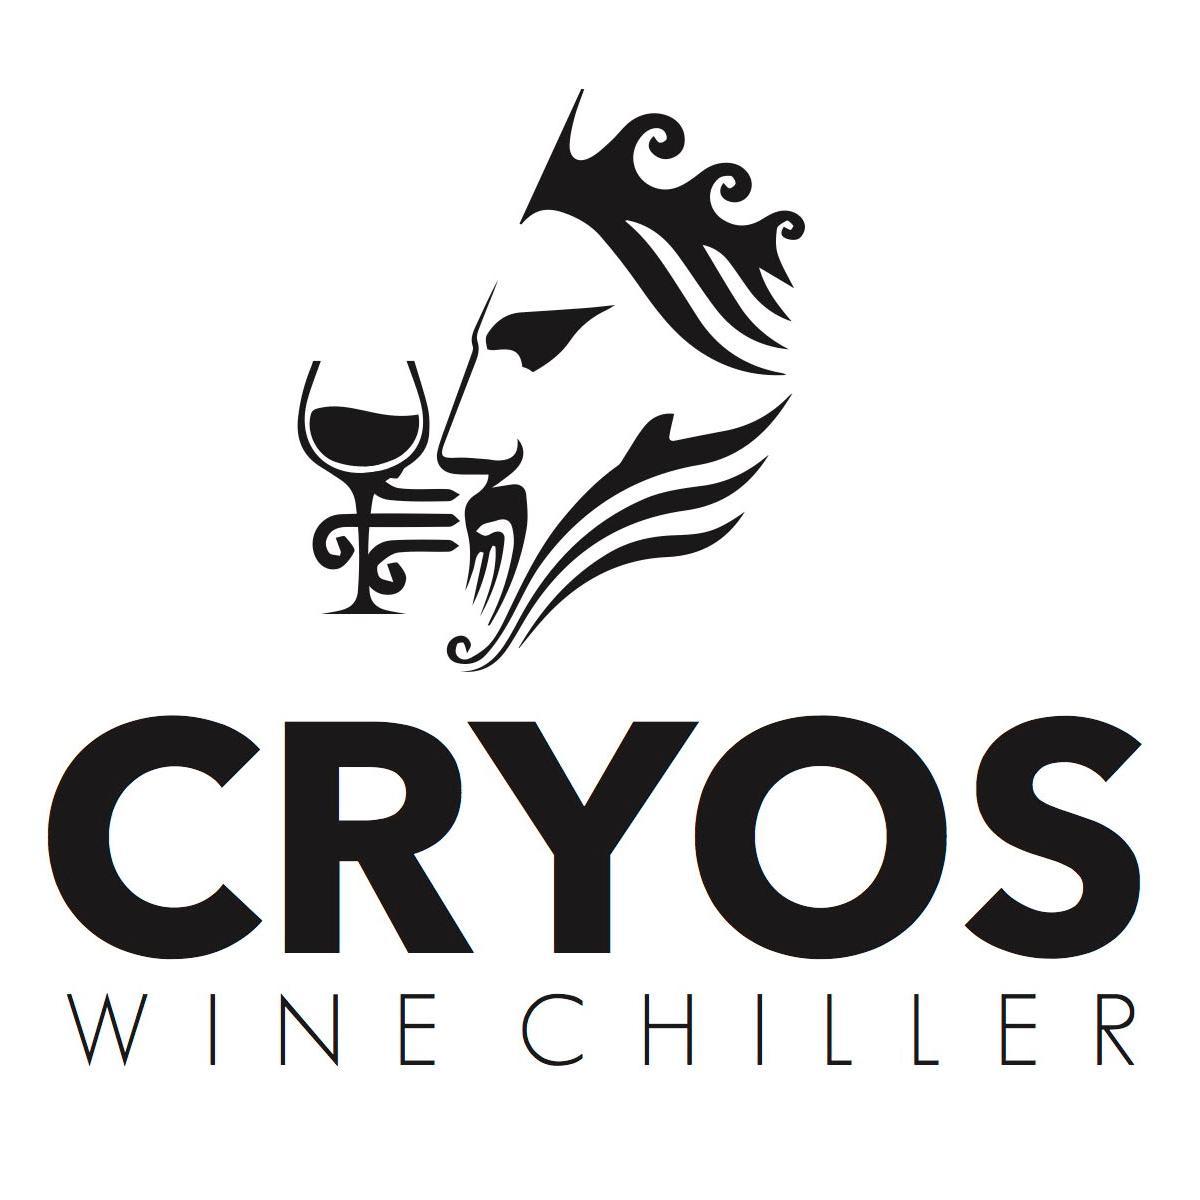 Instantly chill any wine to the perfect temperature. Follow us for updates and product launch notifications!